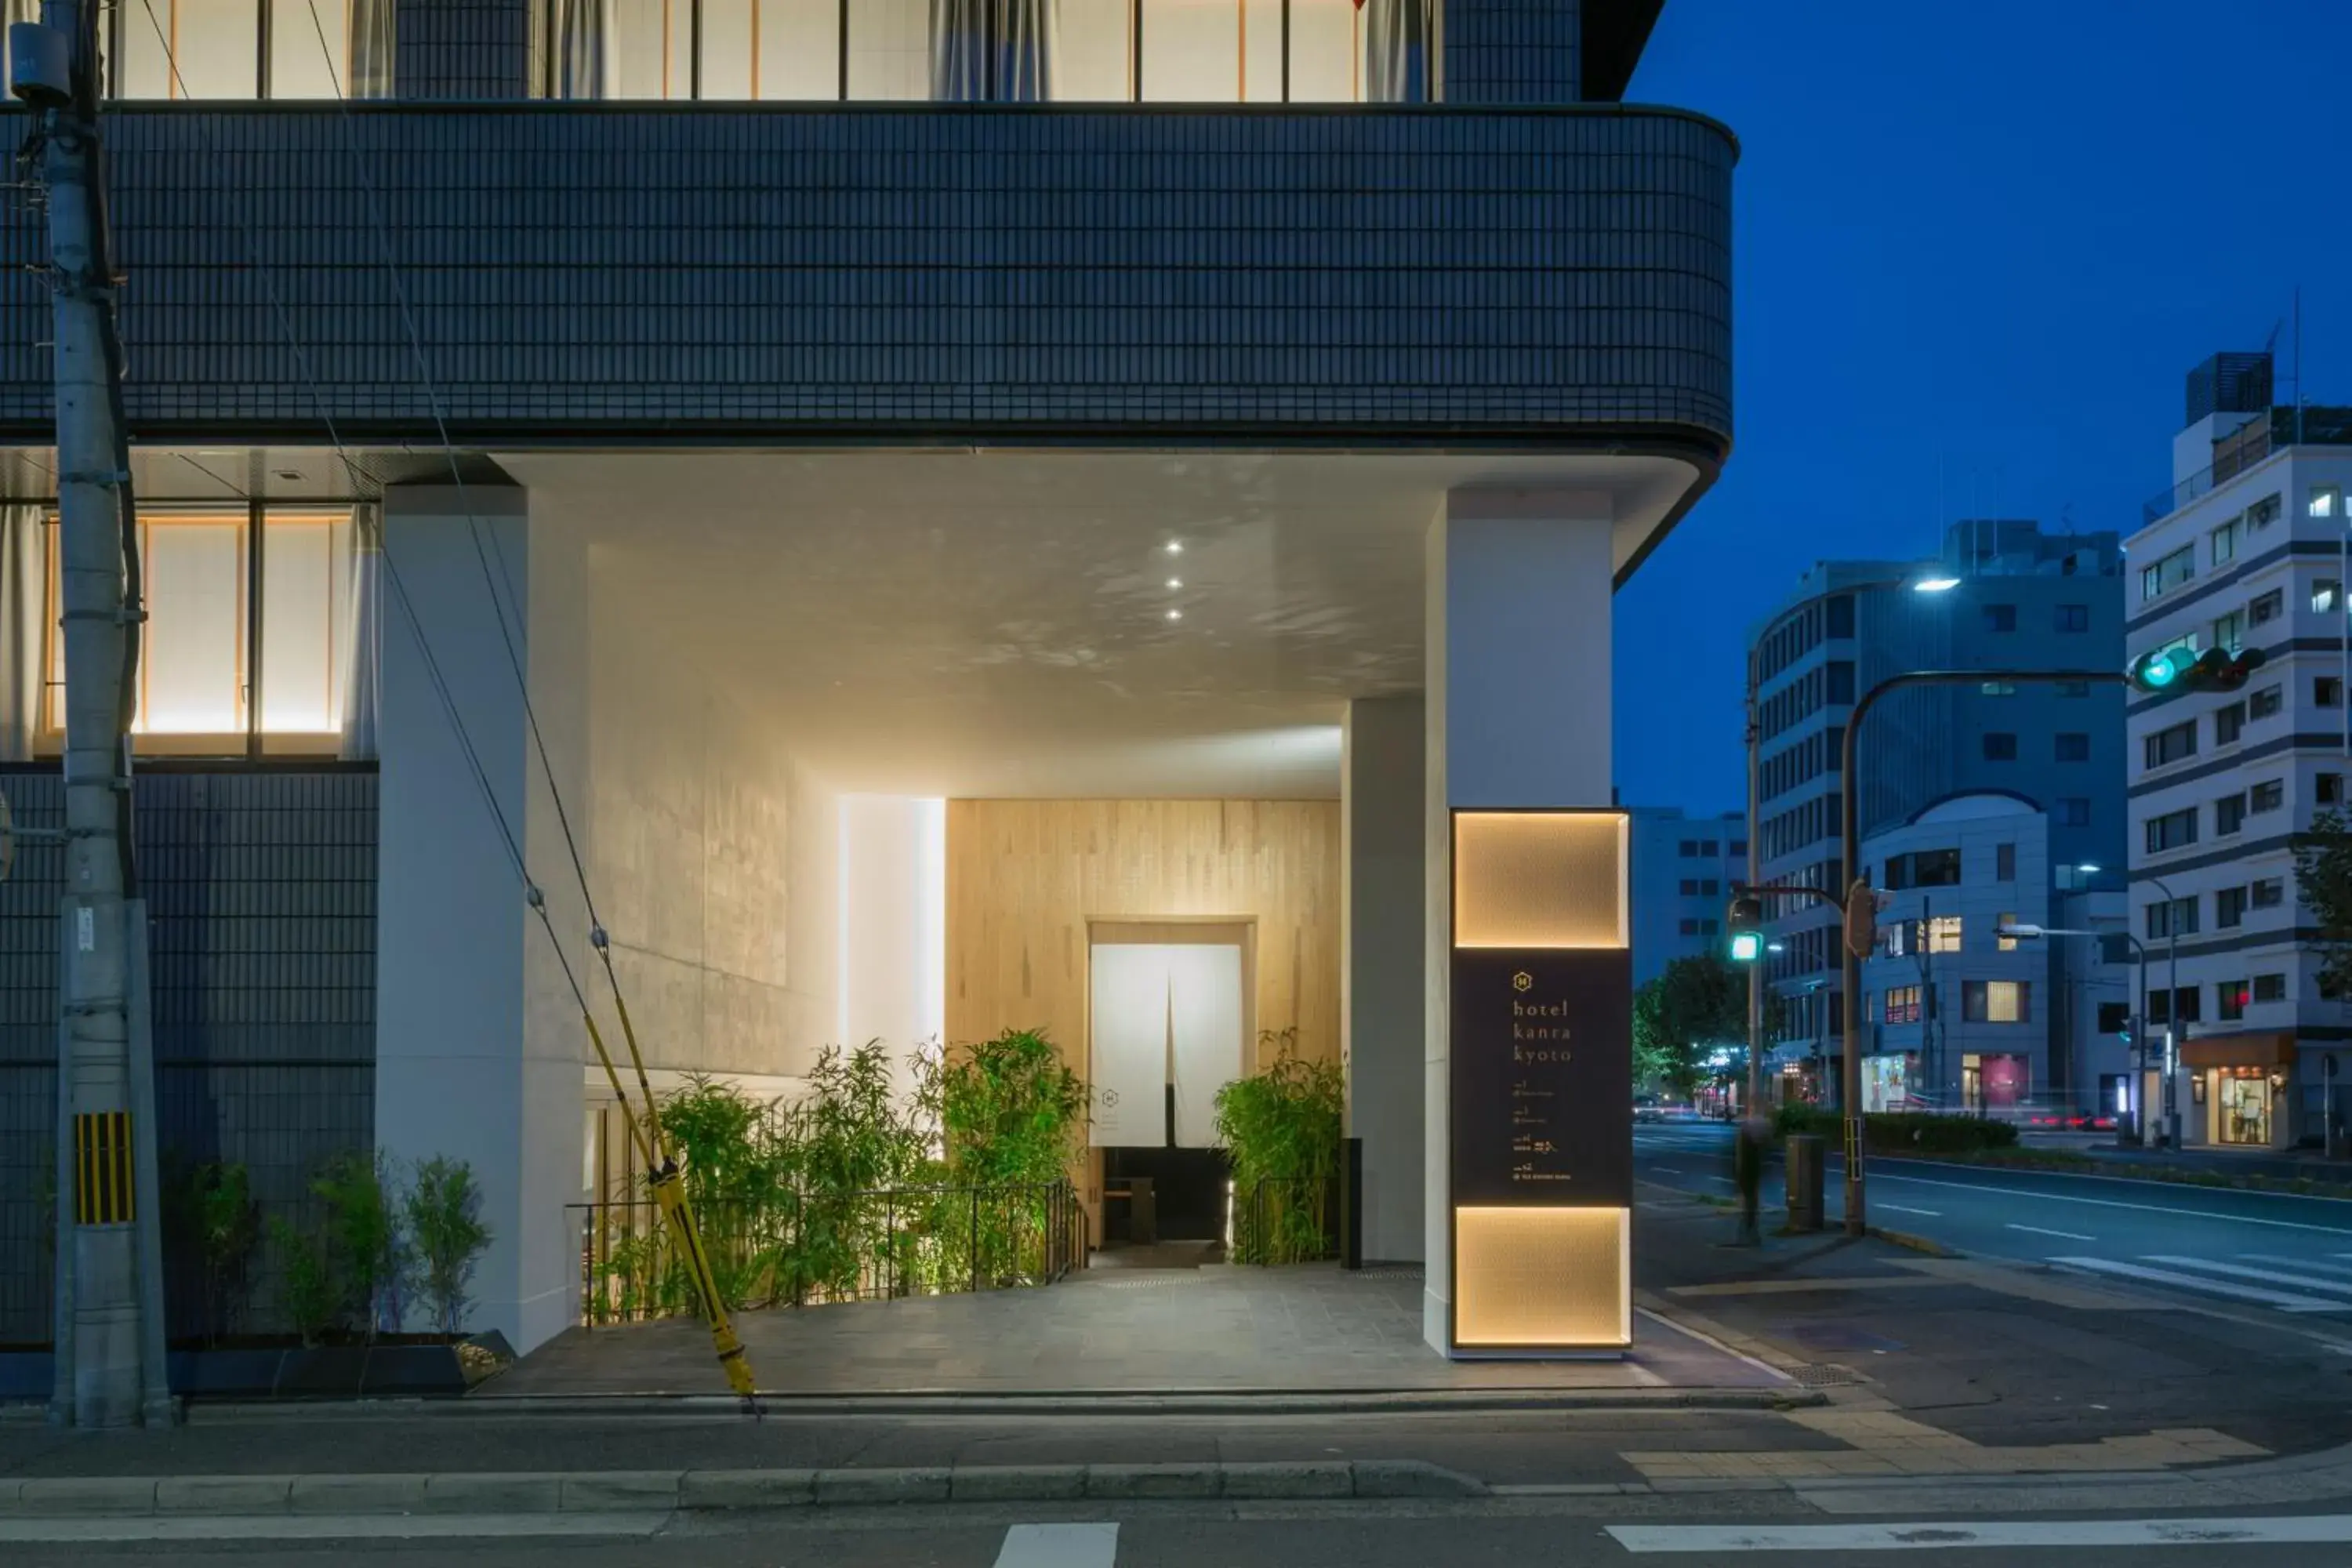 Property Building in hotel kanra kyoto